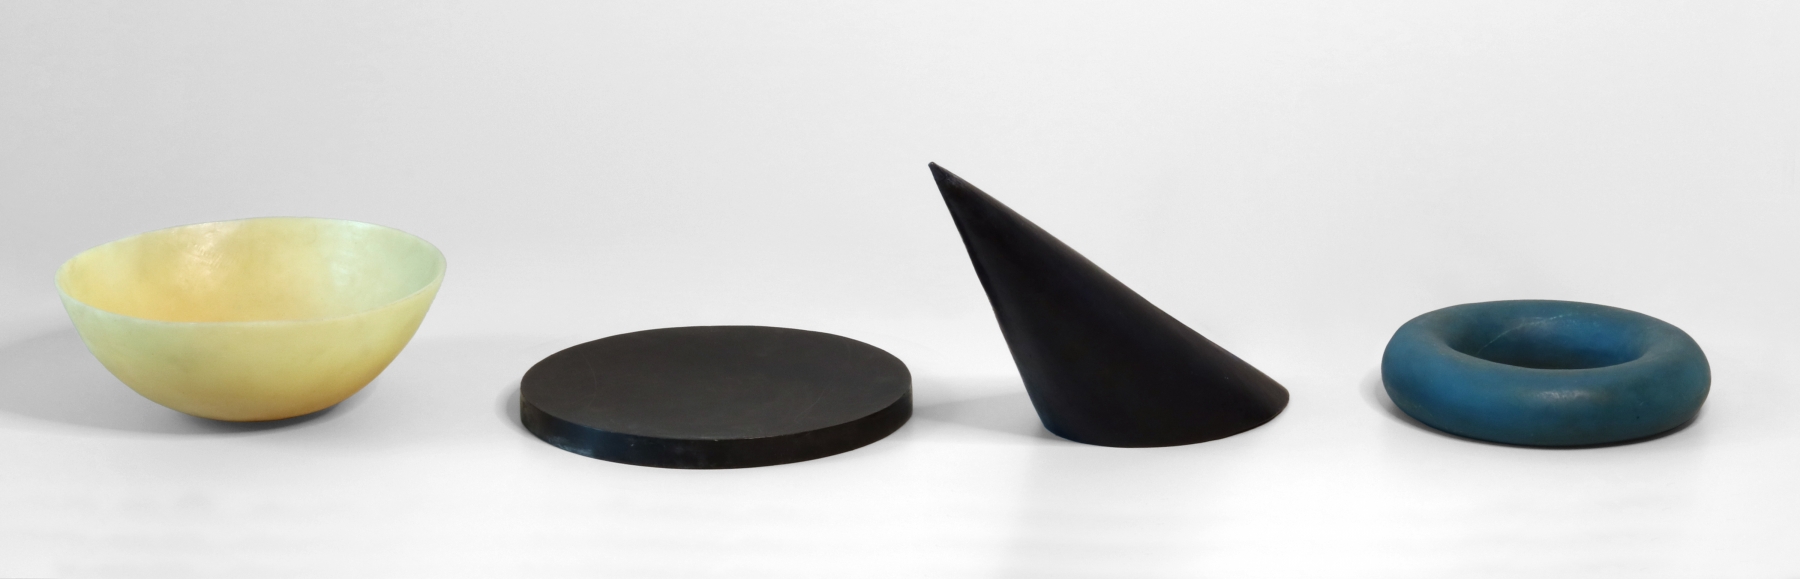 &nbsp; &nbsp; &nbsp; &nbsp; &nbsp; &nbsp; &nbsp; &nbsp; &nbsp; &nbsp;&nbsp;Four Forms Based on the Circle (bowl, disk, ring, tilted cone), 1992-93, beeswax and pigment, dimensions variable.&nbsp;Private Collection. Courtesy Krakow Witkin Gallery, Boston.